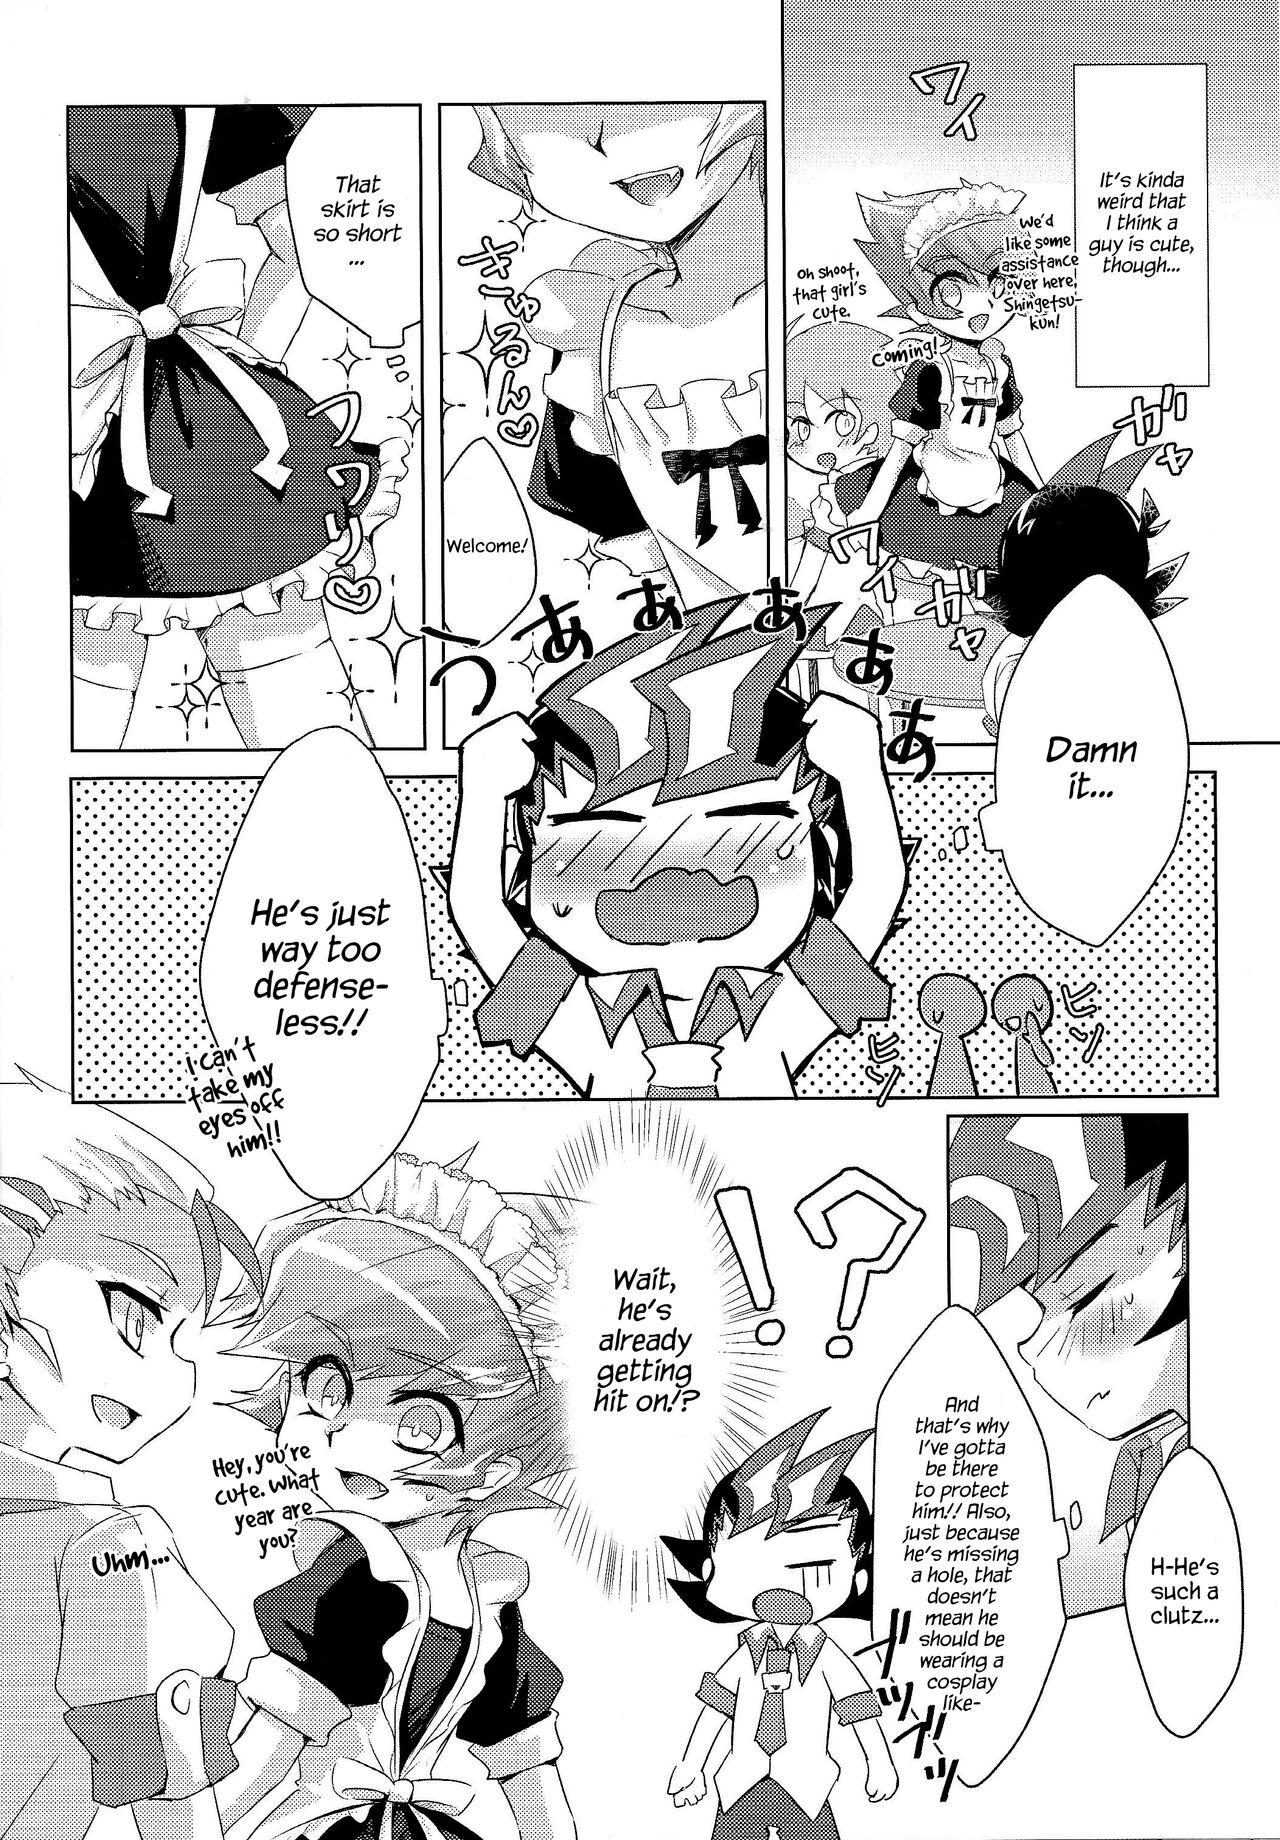 Sexy Whores Stand by me - Yu gi oh zexal Fudendo - Page 5